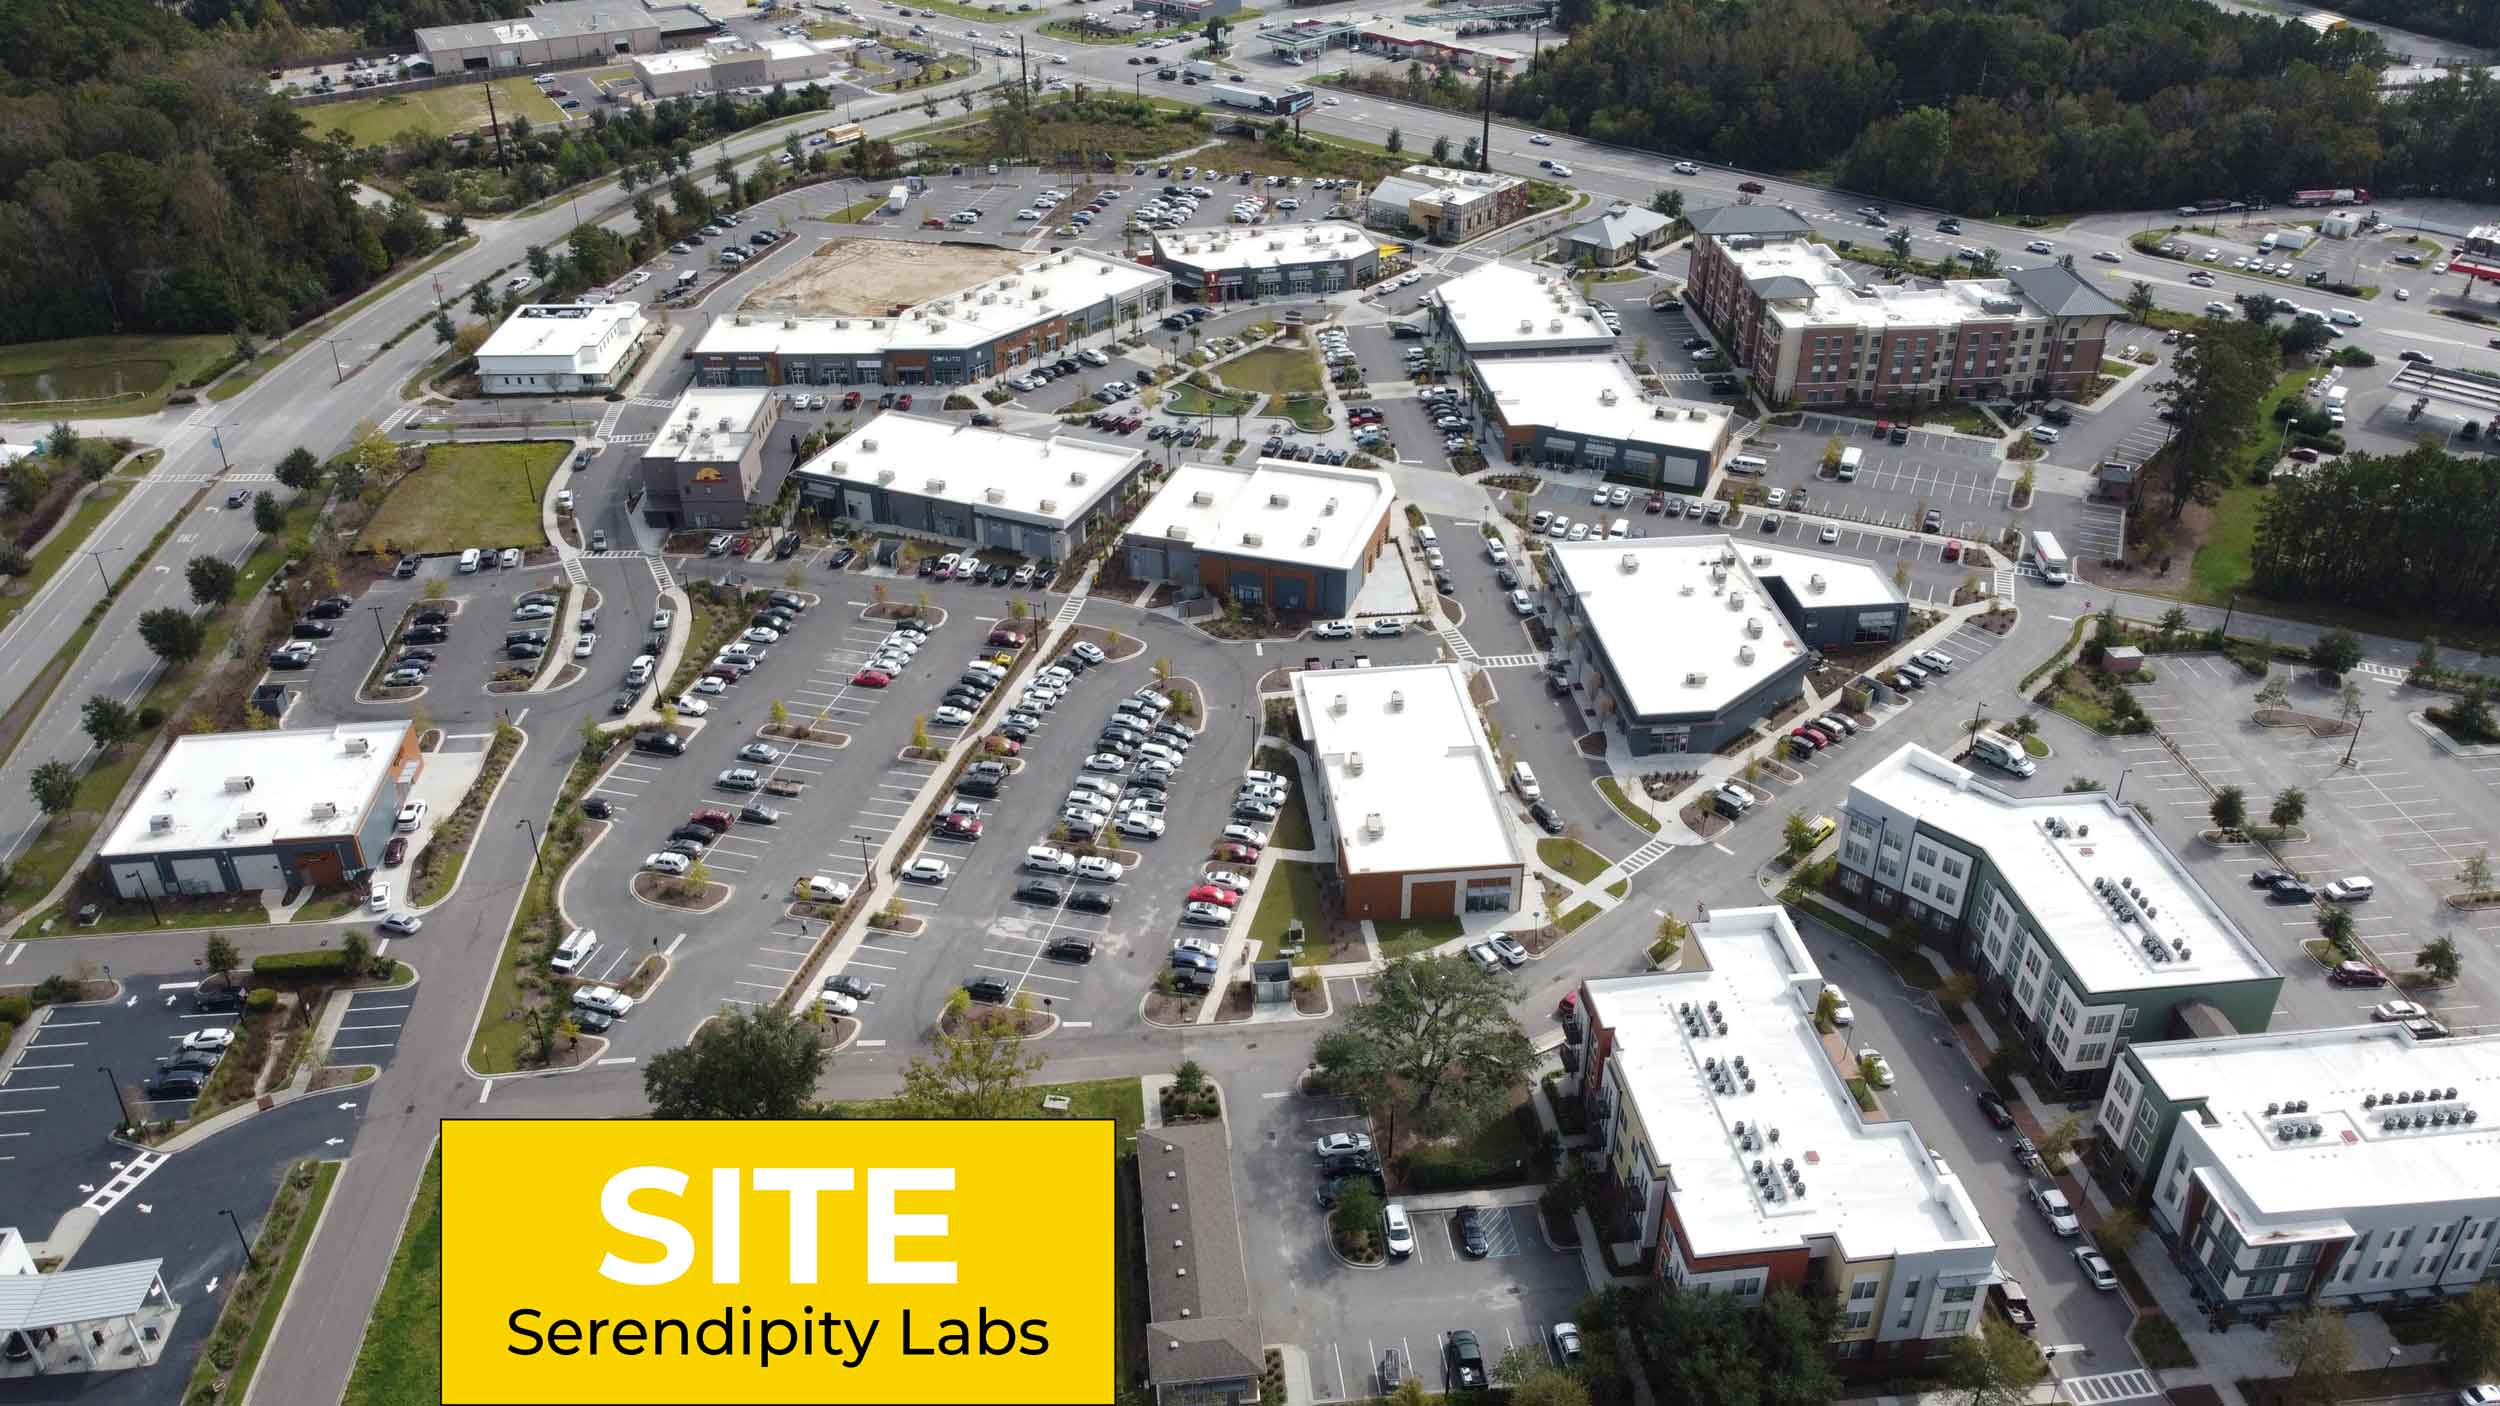 Serendipity Labs - Site Defined